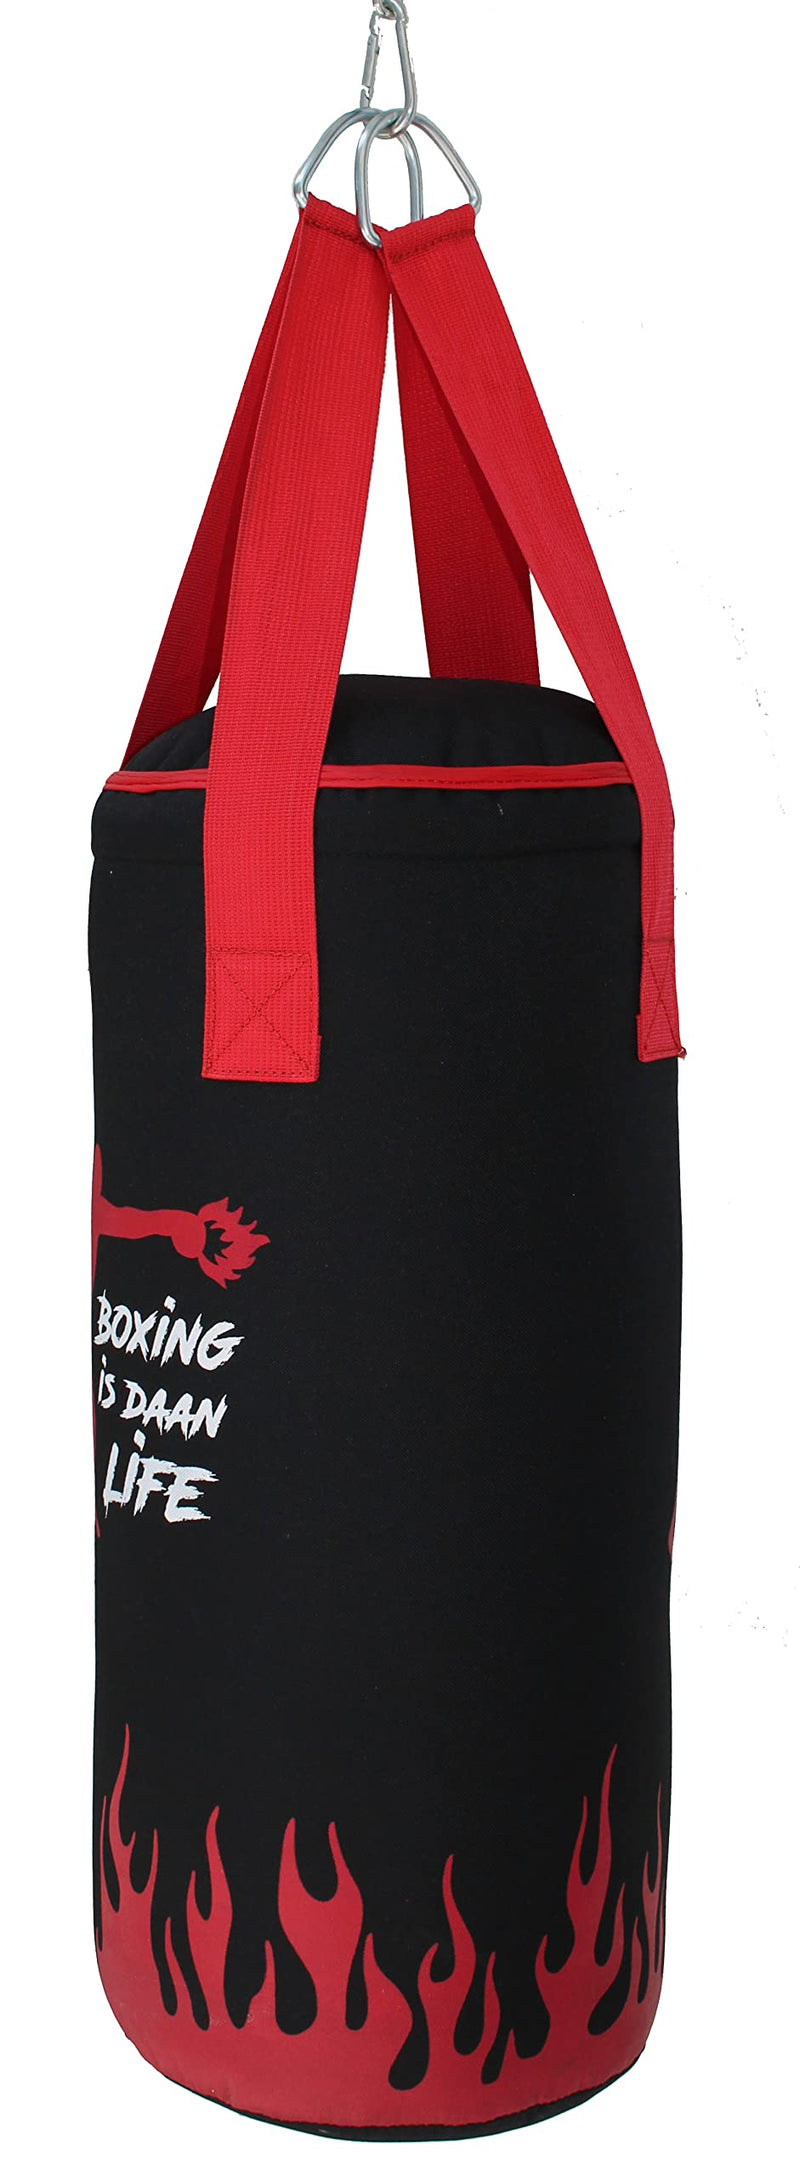 DAAN MMA Kids Punching Bag, Unfilled Punching Bag Kid Free Boxing Gloves, MMA Kickboxing Training. Bag for Exercise Karate, Durable Heavy Duty Indoor and Outdoor Workout Training 50cm - BeesActive Australia